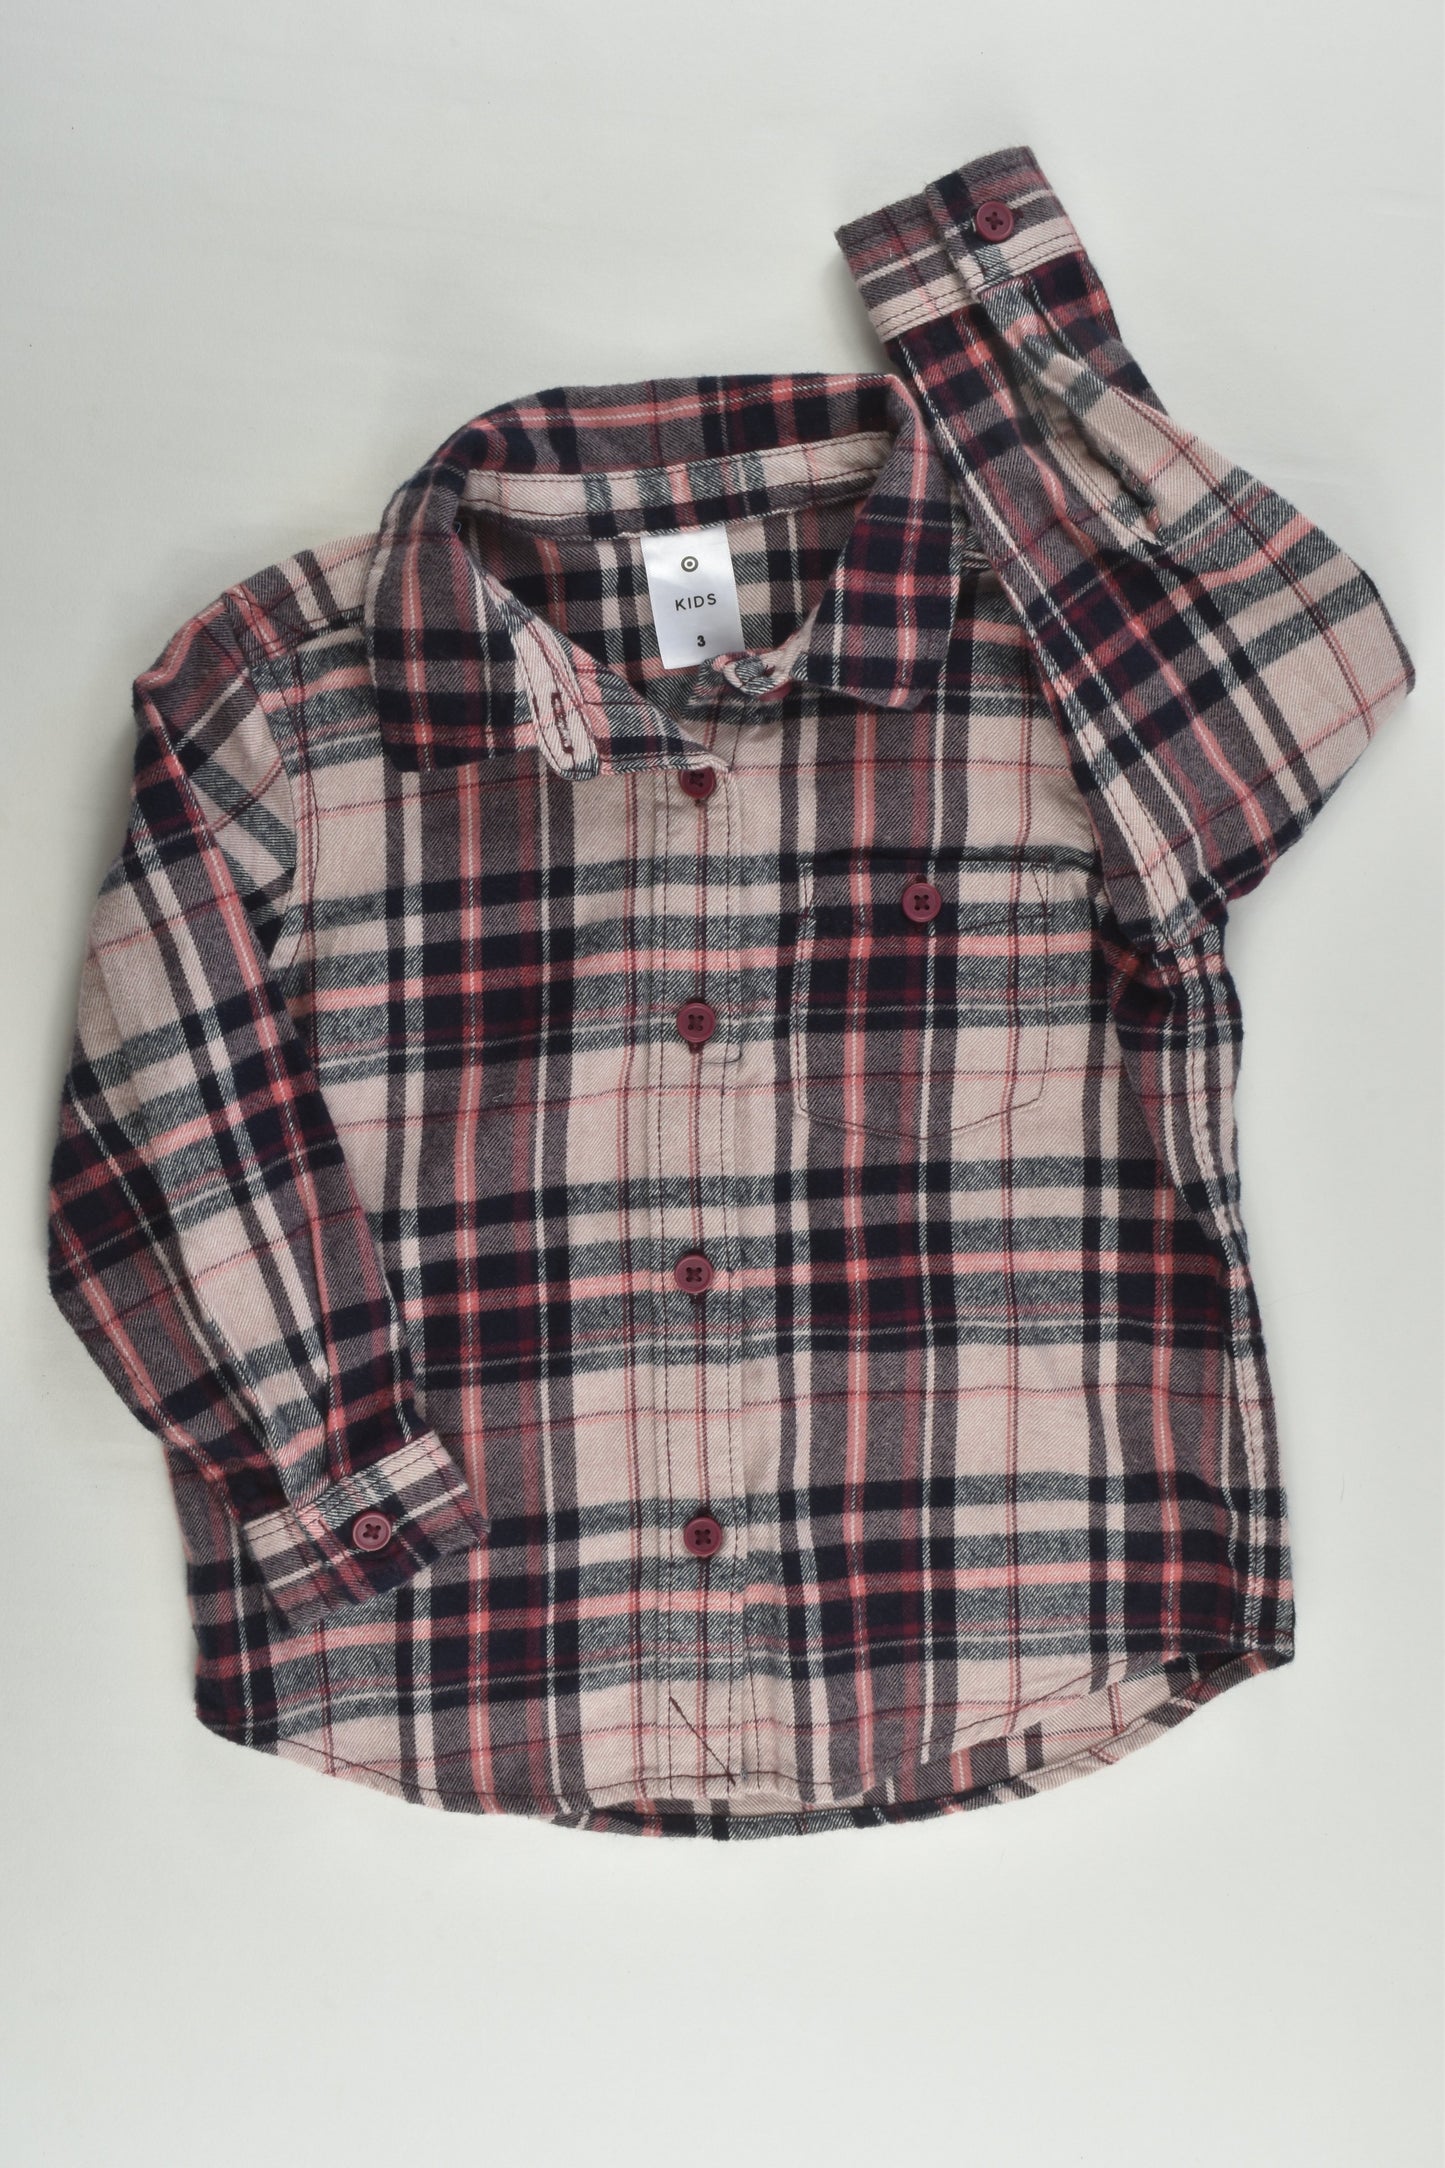 Target Size 3 Checked Flannelette Shirt